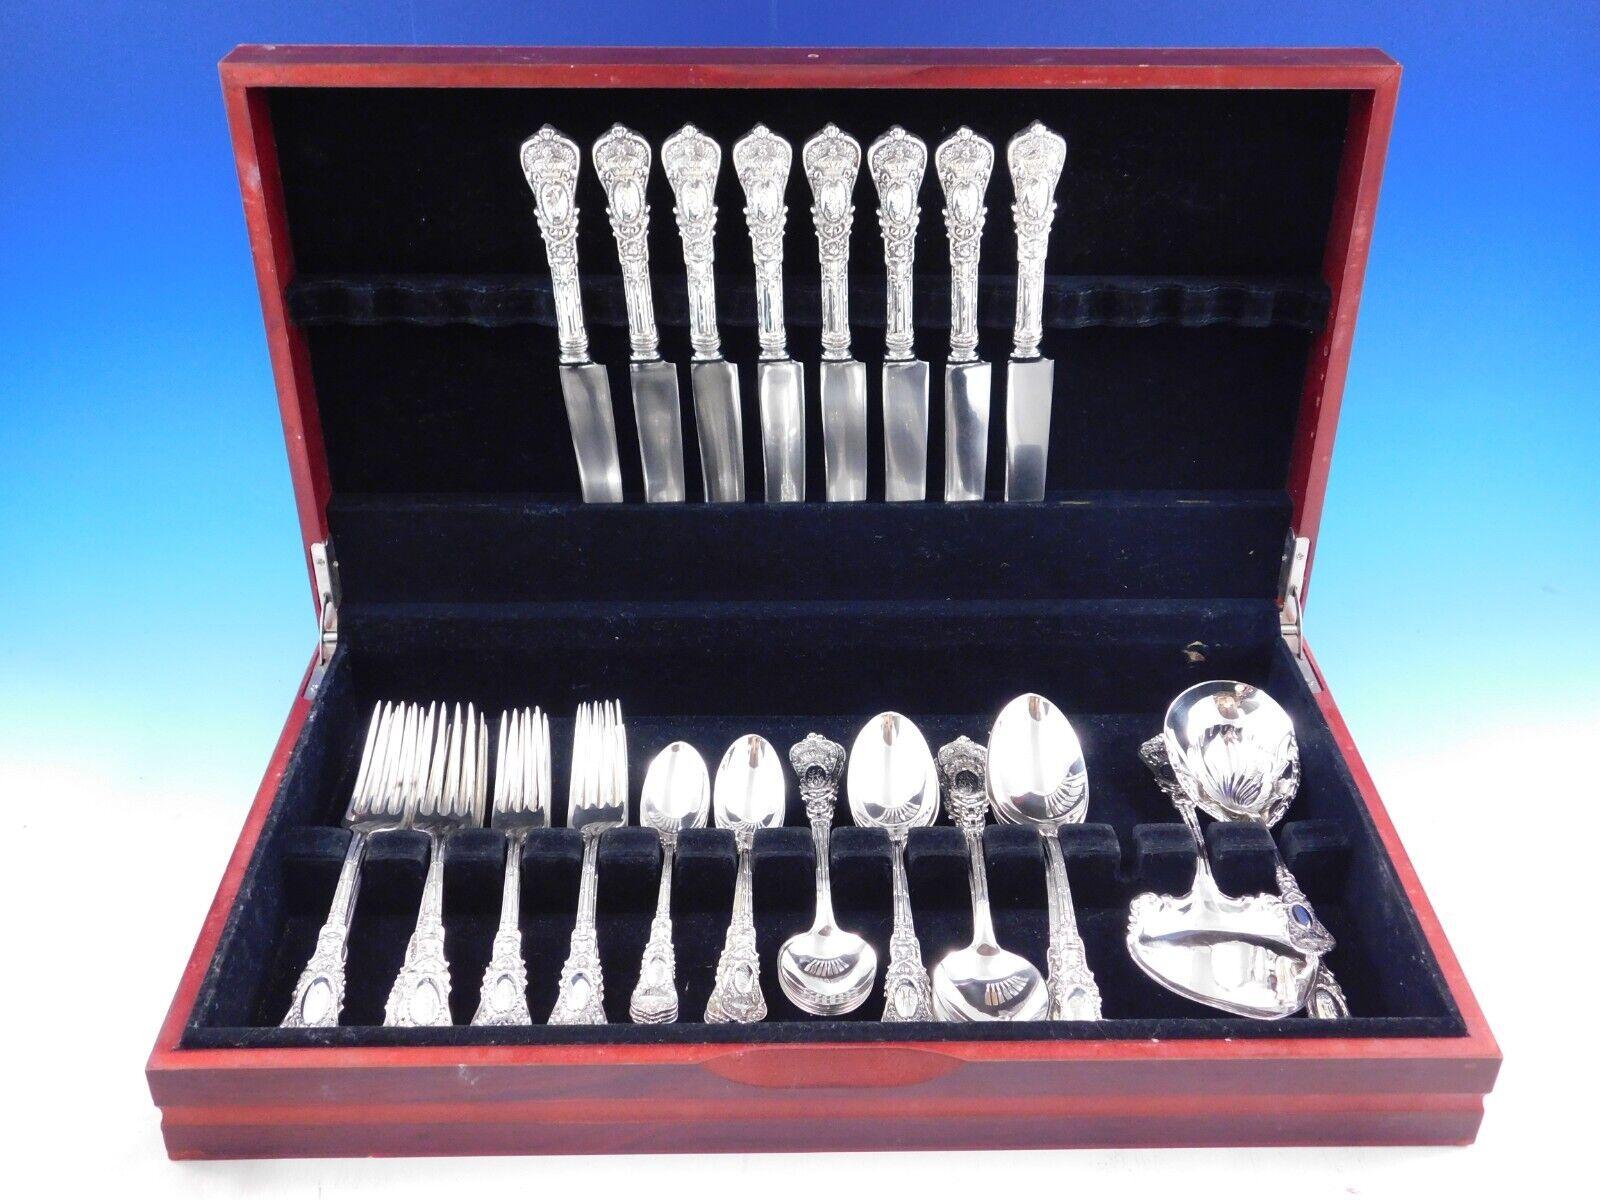 Rare Dinner Size Empire by Durgin sterling silver flatware set - 51 pieces. This pattern was introduced in the year 1895 and features a crown above a central cartouche. This set includes:

8 Dinner Size Knives with stainless Old French Blades, 9